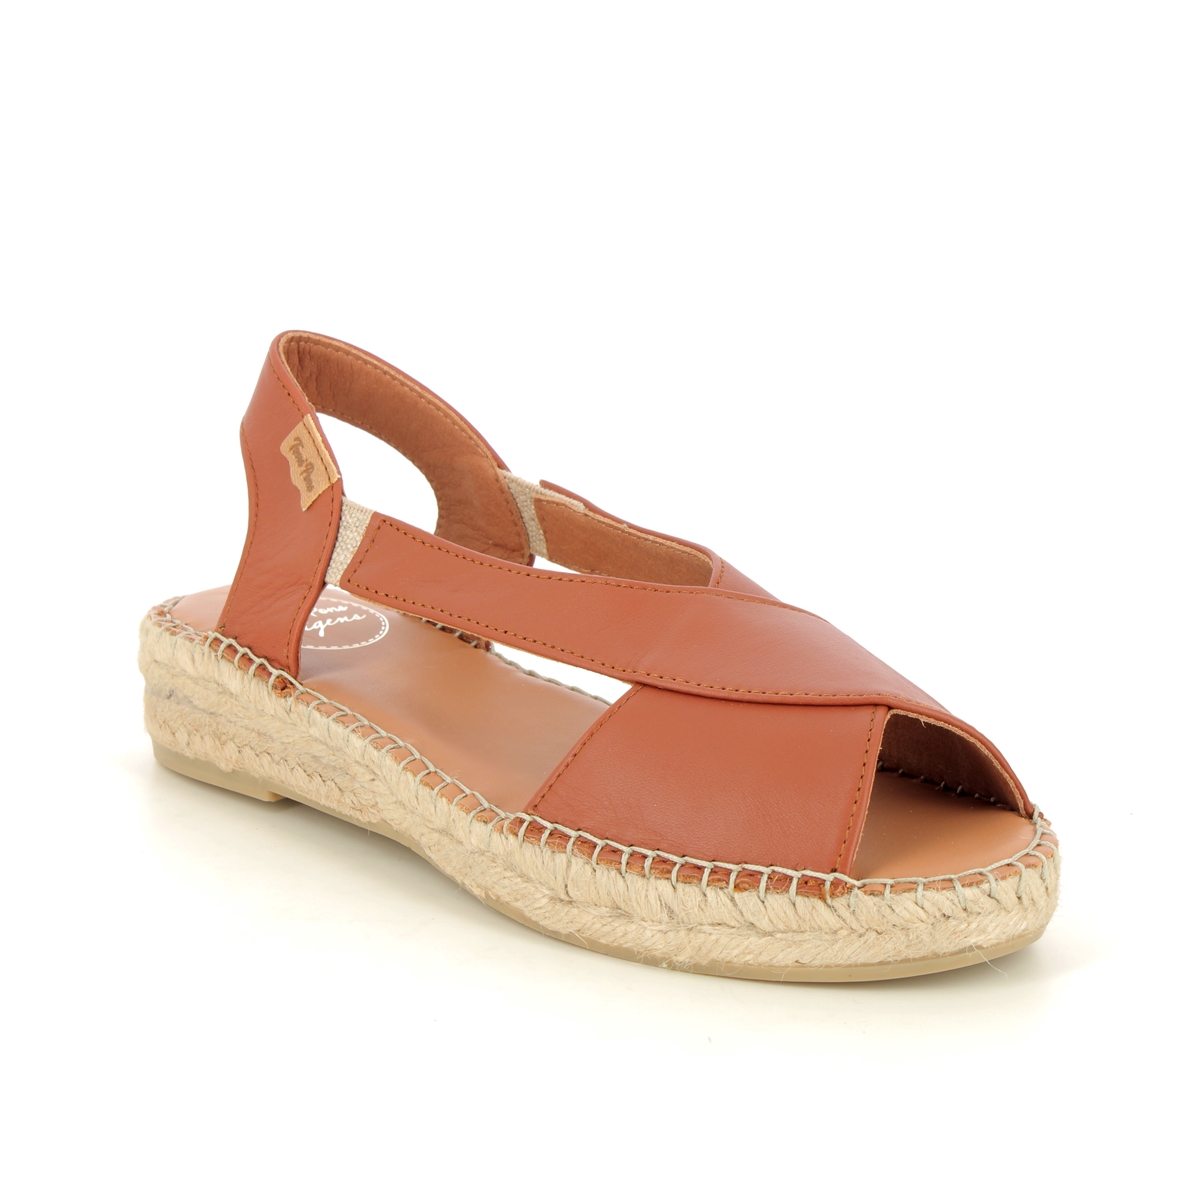 Toni Pons Elda Tan Leather Womens Espadrilles 2004-21 in a Plain Leather in Size 39